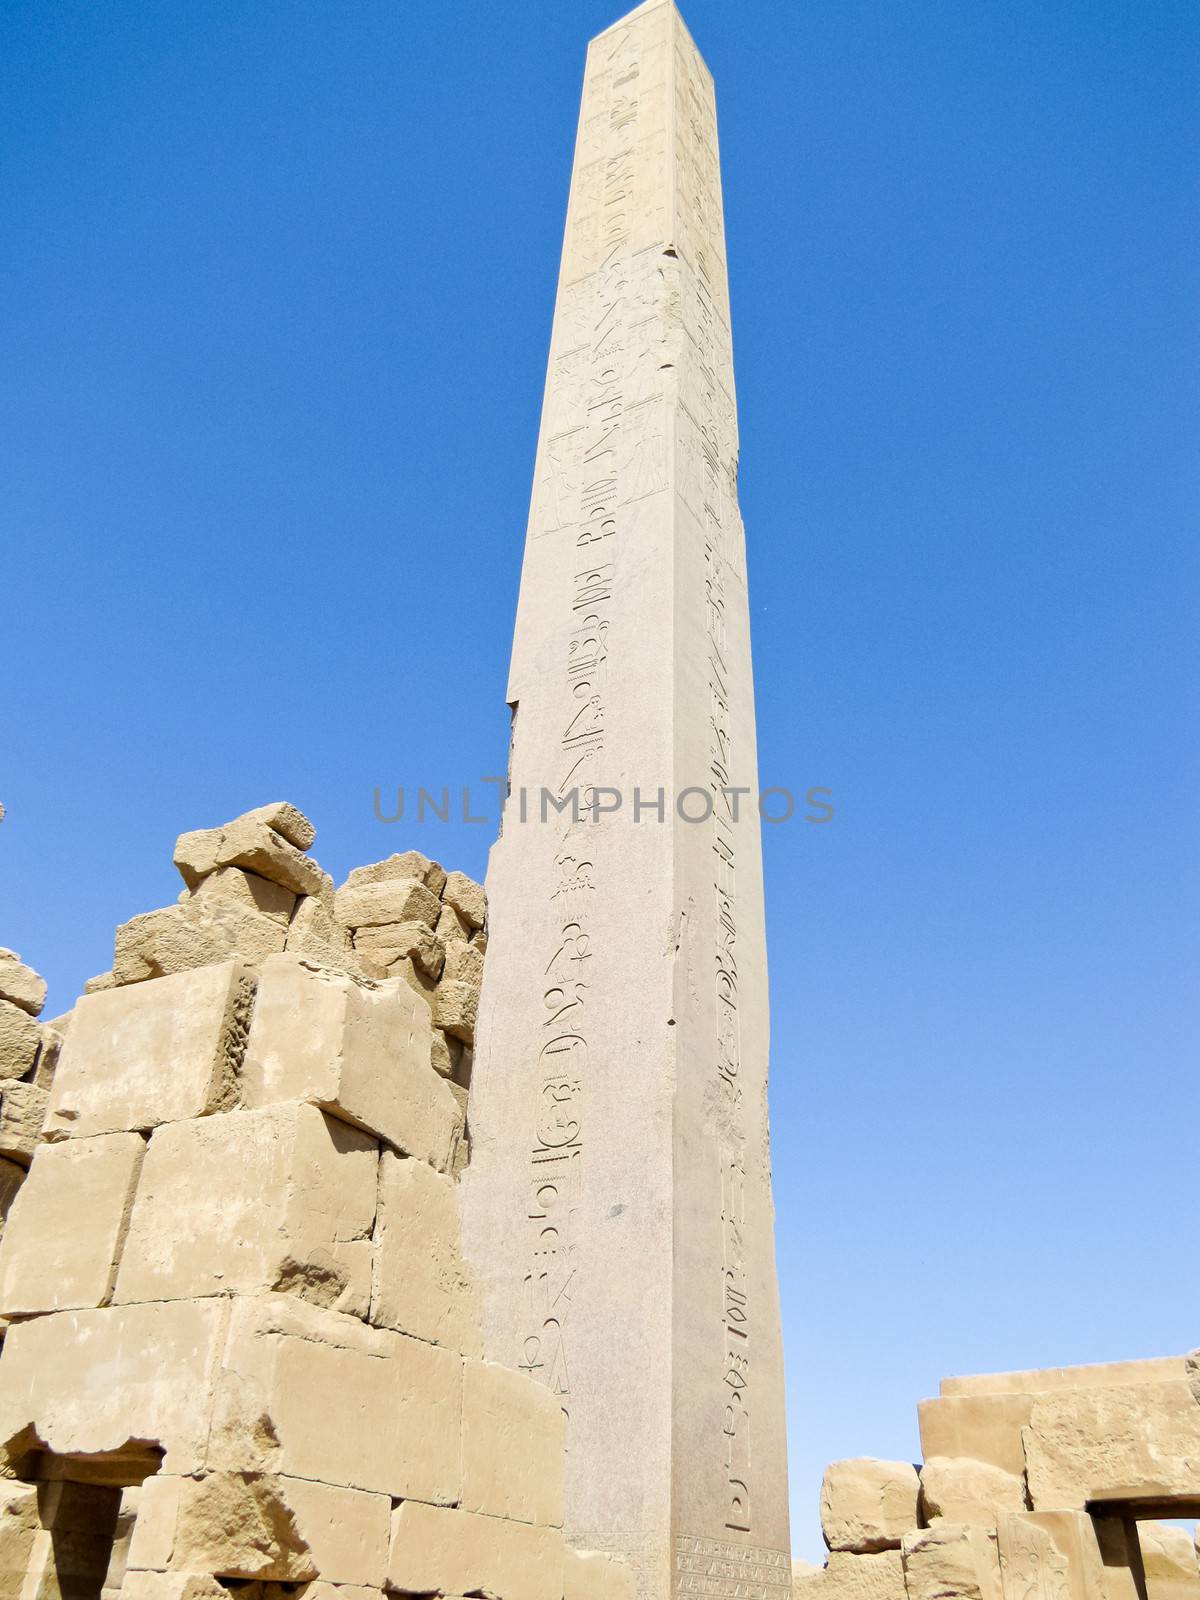 Ancient ruins of Karnak temple at Luxor in Egypt